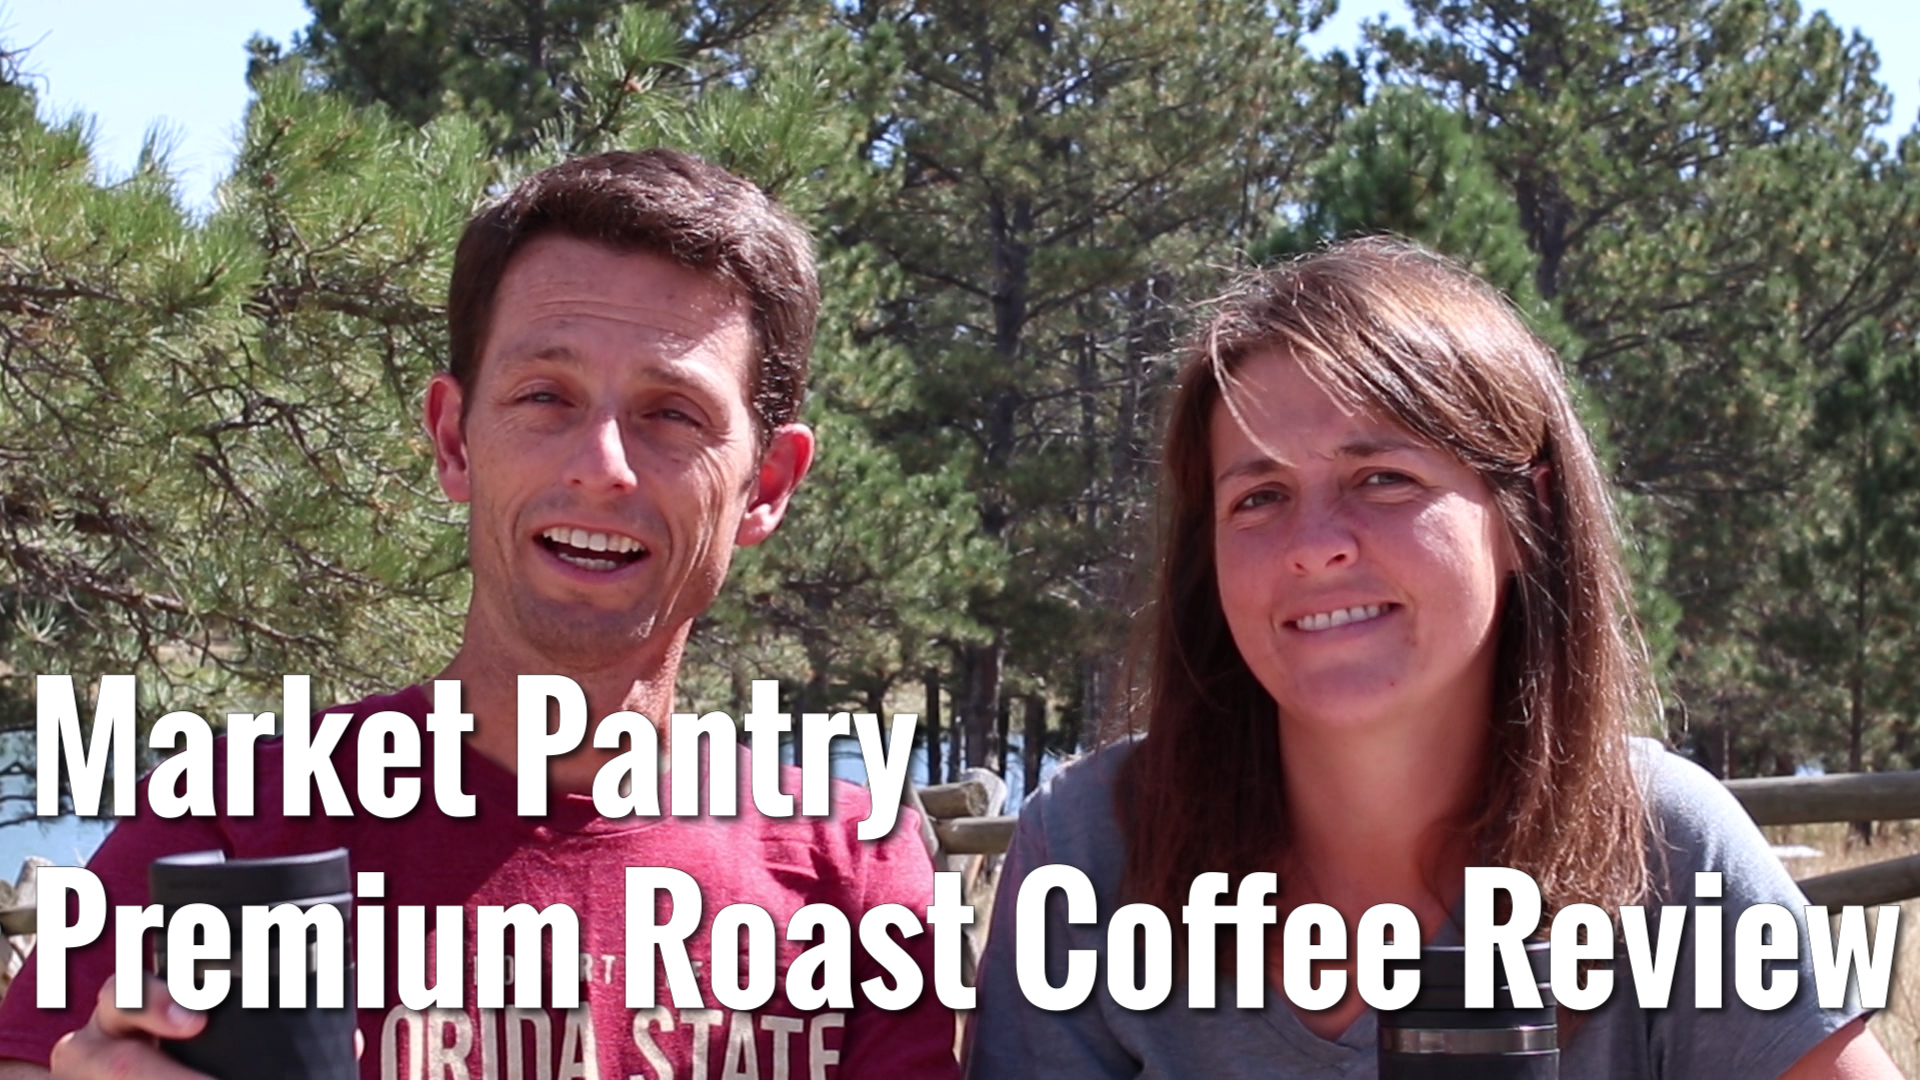 Video thumbnail for the review of Market Pantry Premium Roast coffee